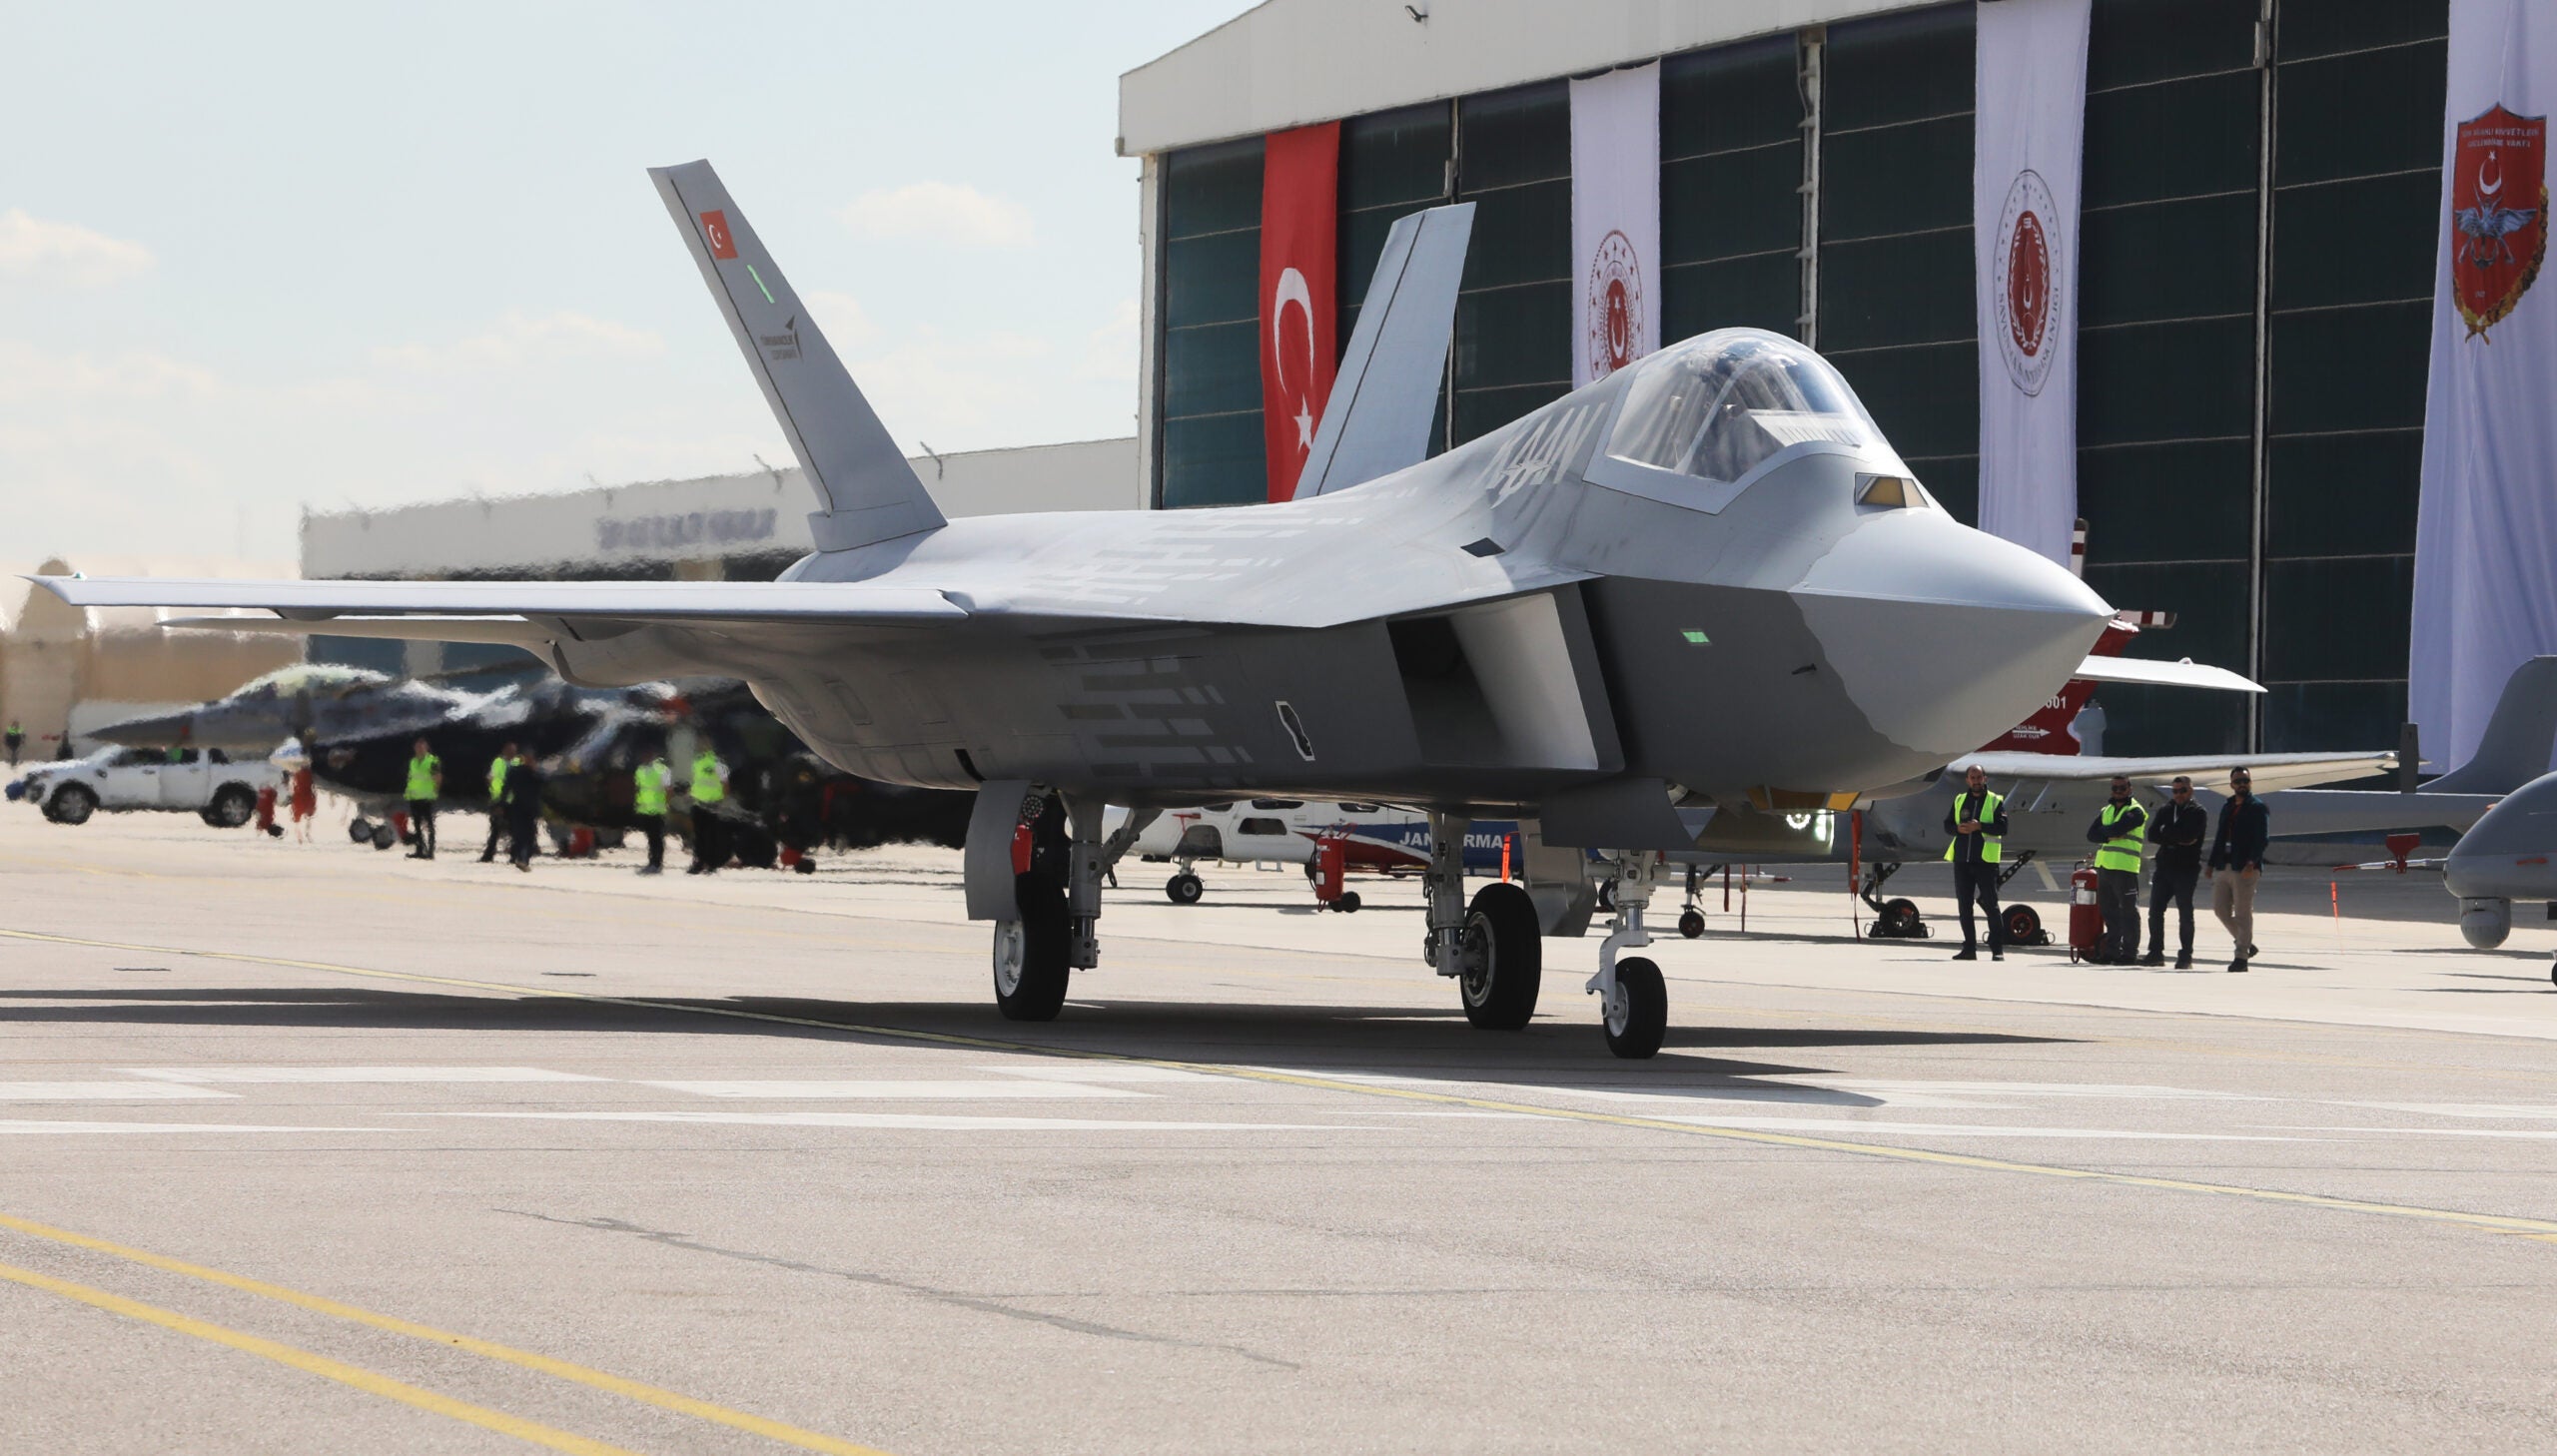 ANKARA, TURKIYE- MAY 1: Presentation ceremony of the National Combat Aircraft KAAN  on May 1, 2023 in Ankara, Türkiye. According to the President's statements, the National Combat Aircraft (MMU) or TF-X "Kaan" project, which will enter the inventory of the Turkish Armed Forces, is considered an important step in Turkey's aviation and defense industry. (Photo by Yavuz Ozden/ dia images via Getty Images)